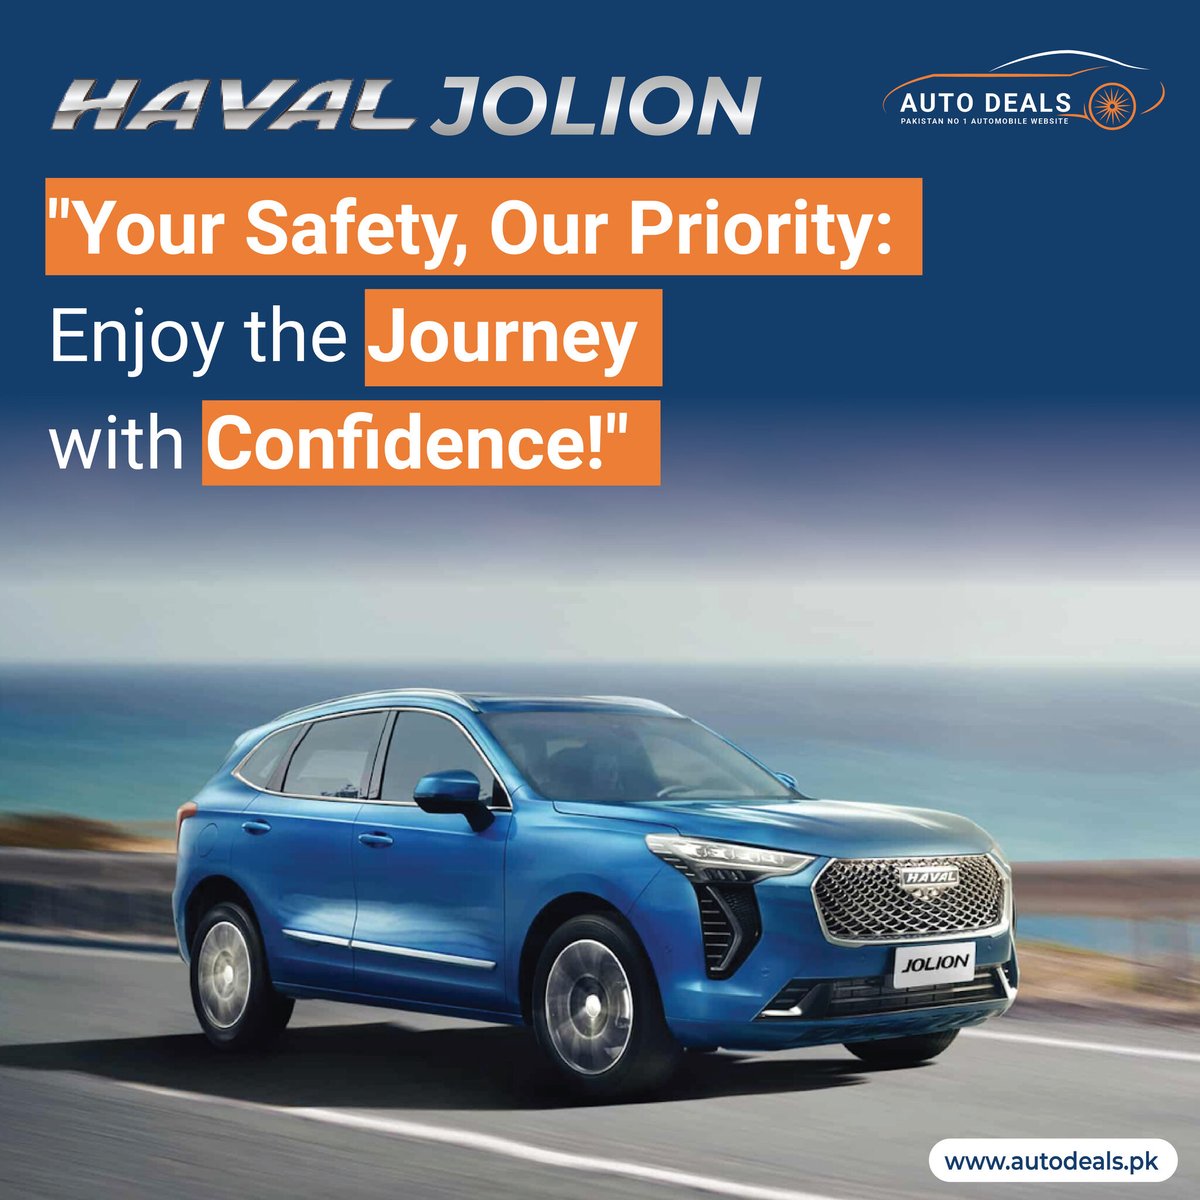 Havel Jolion ...
'Your Safety, Our Priority: Enjoy the Journey with Confidence!'
Visit Our Website: autodeals.pk 
#Havelcar #carlover #carupdate #safedrive #autodeals